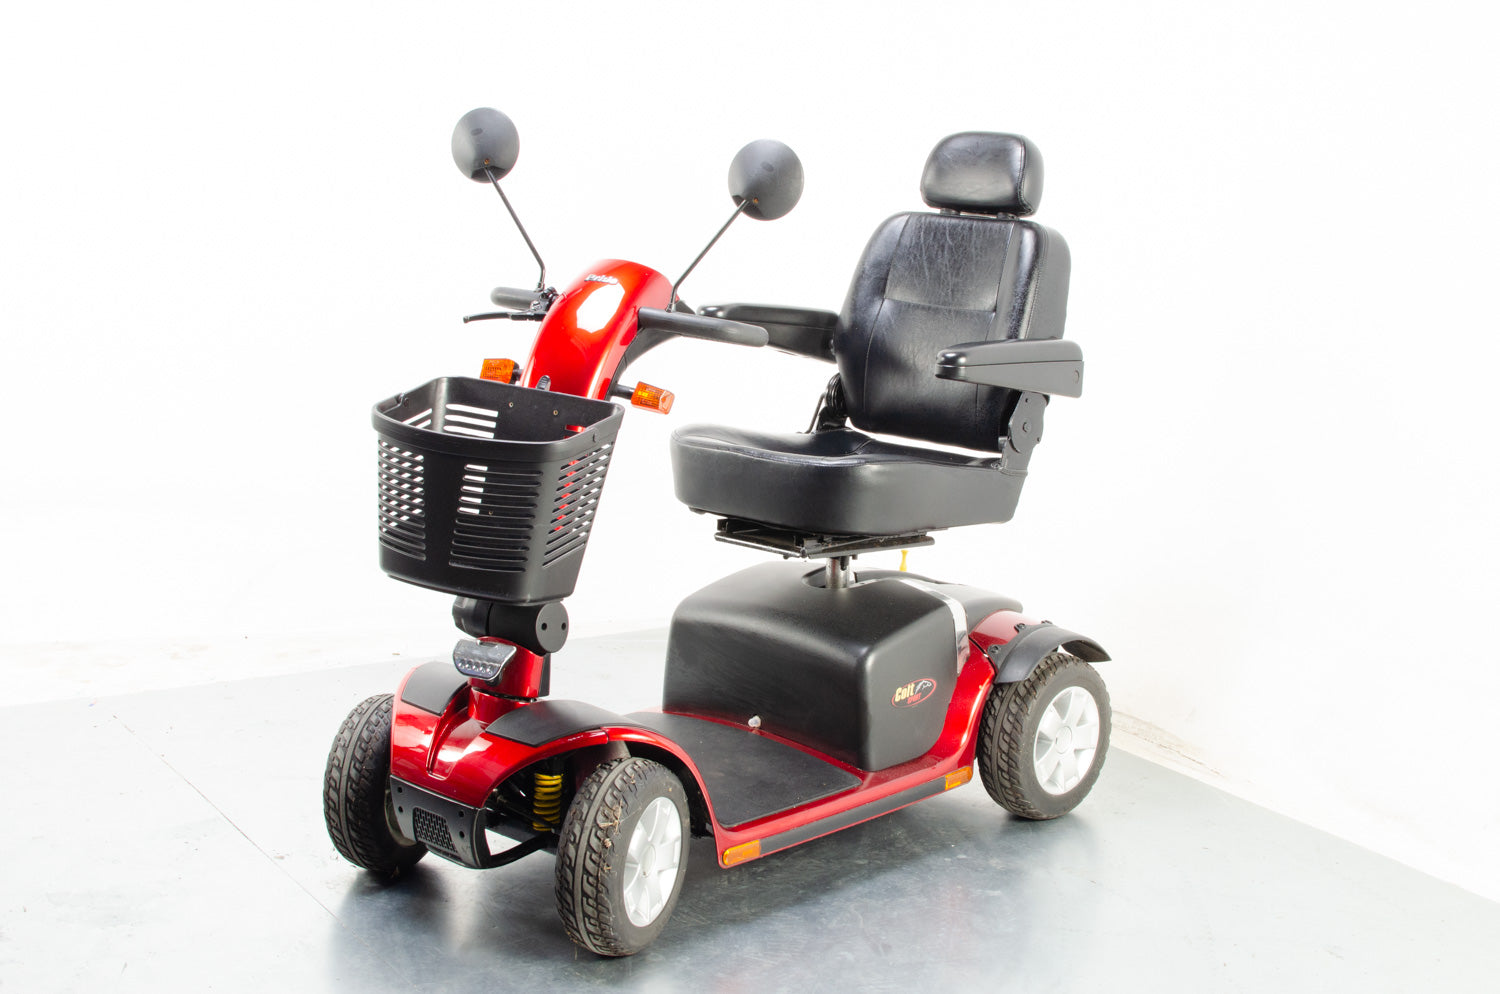 2016 Pride Colt Sport 8mph Mid Size Transportable Mobility Boot Scooter in Red